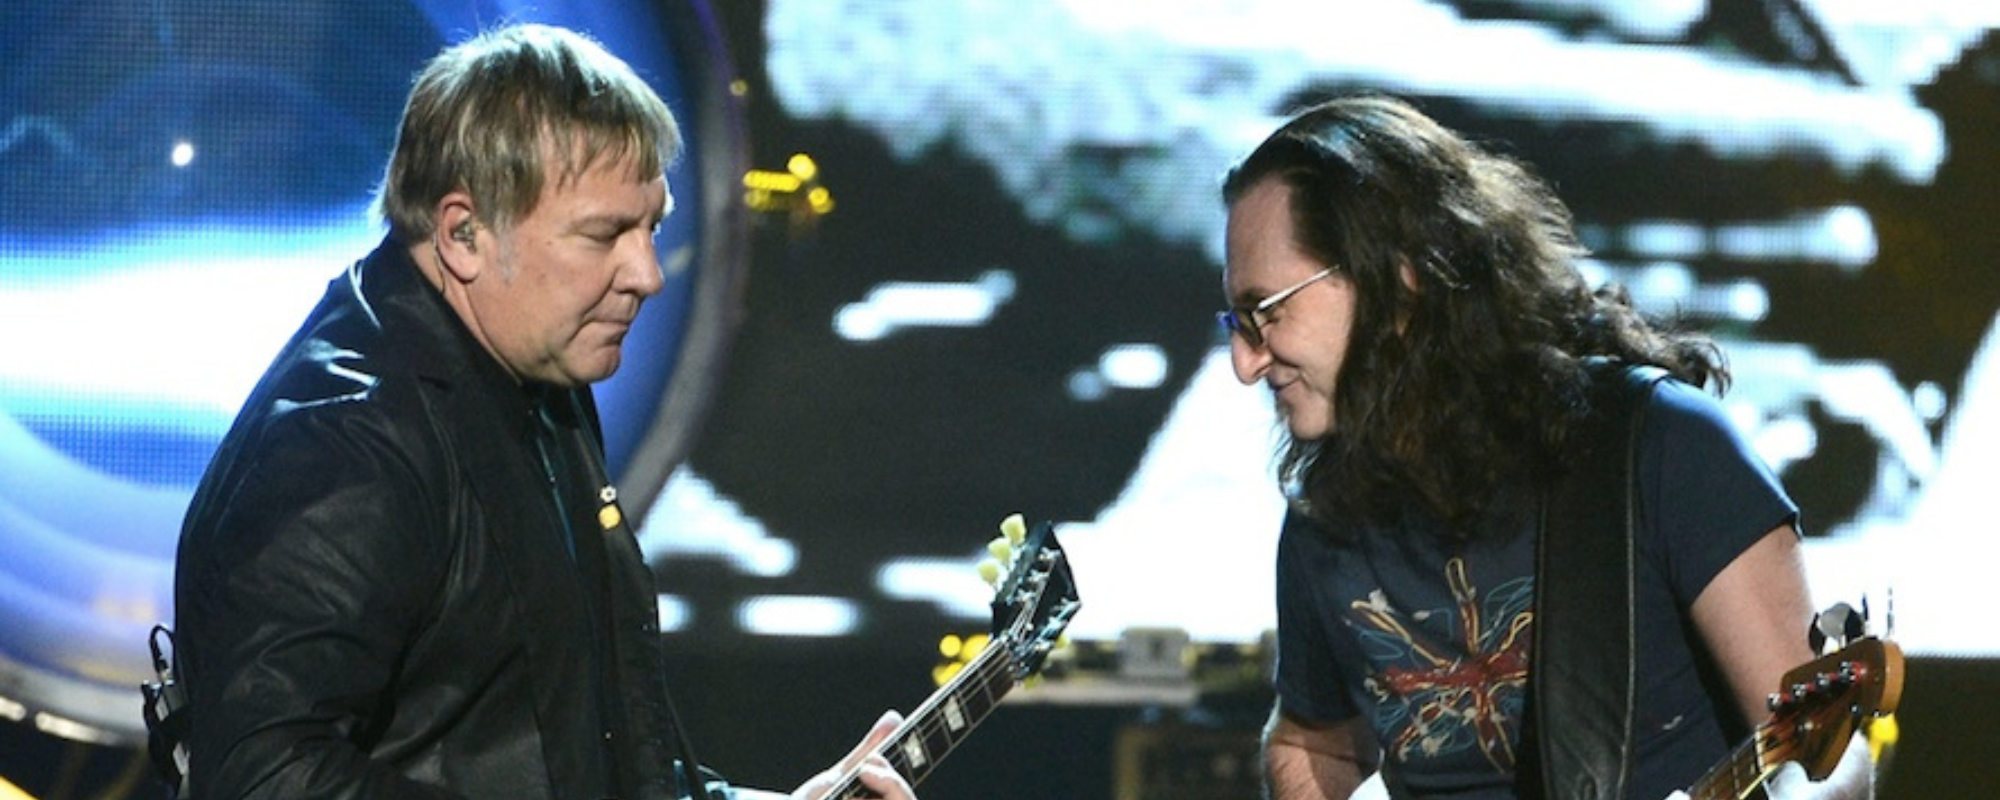 Geddy Lee Suggests He May Be Ready for a Rush Reunion Project with Alex Lifeson